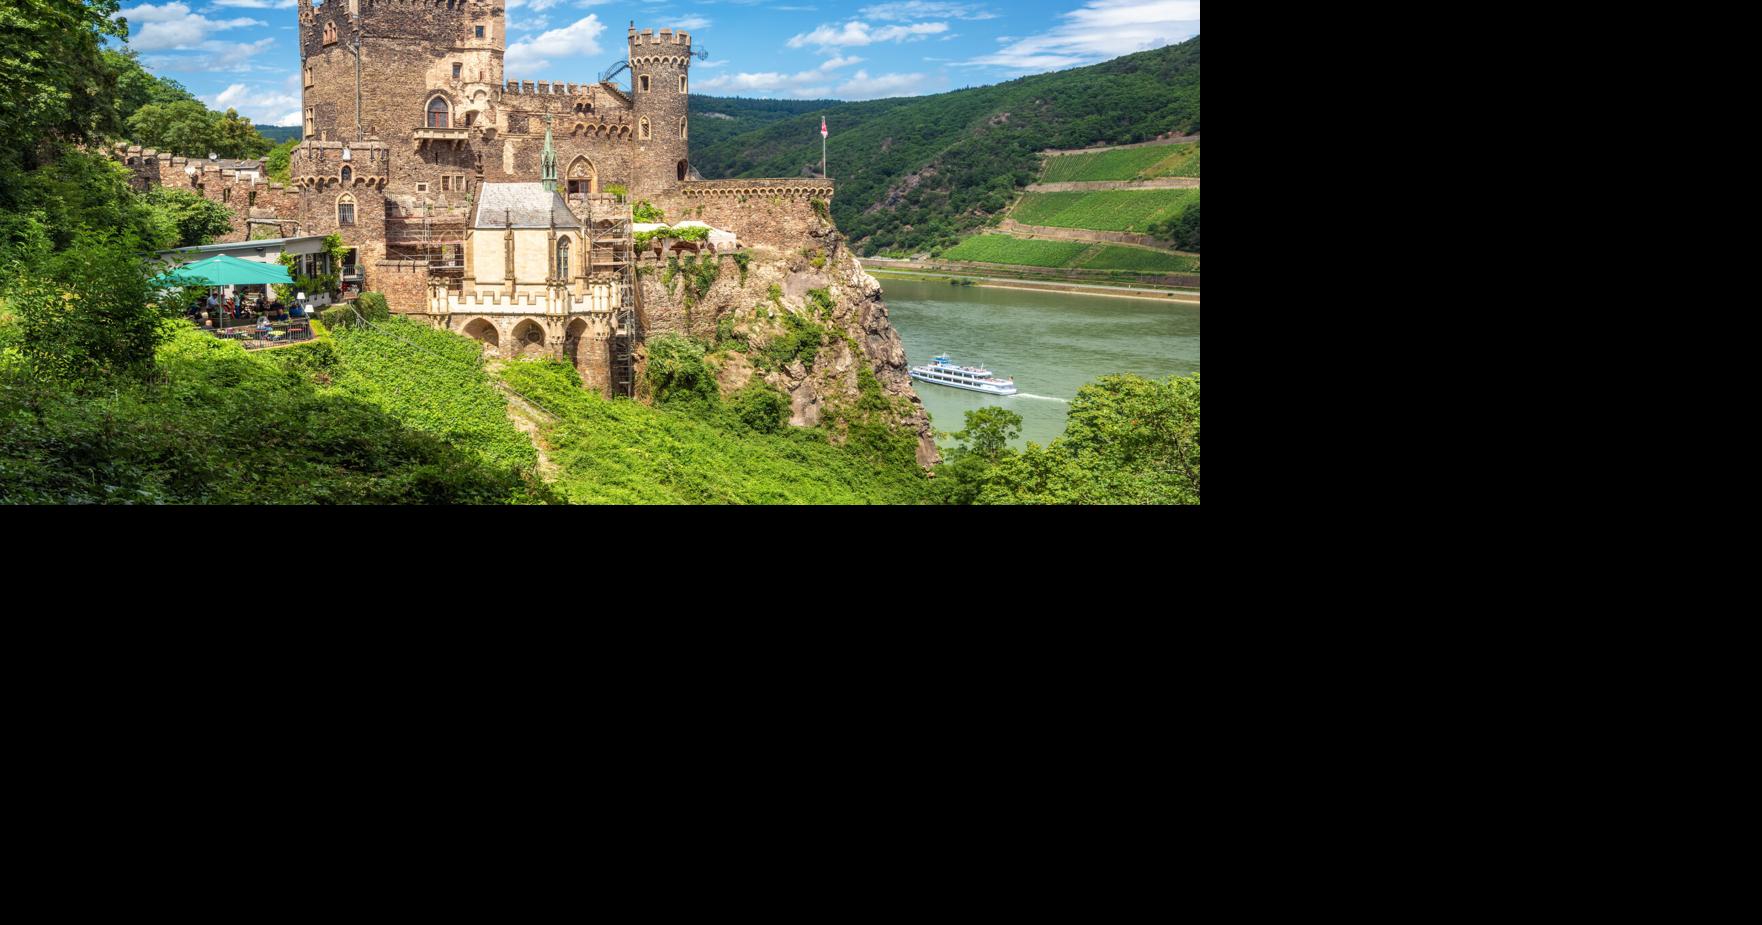 Travel: A week-long window on the Rhine: Cathedrals, food and vineyards | Travel